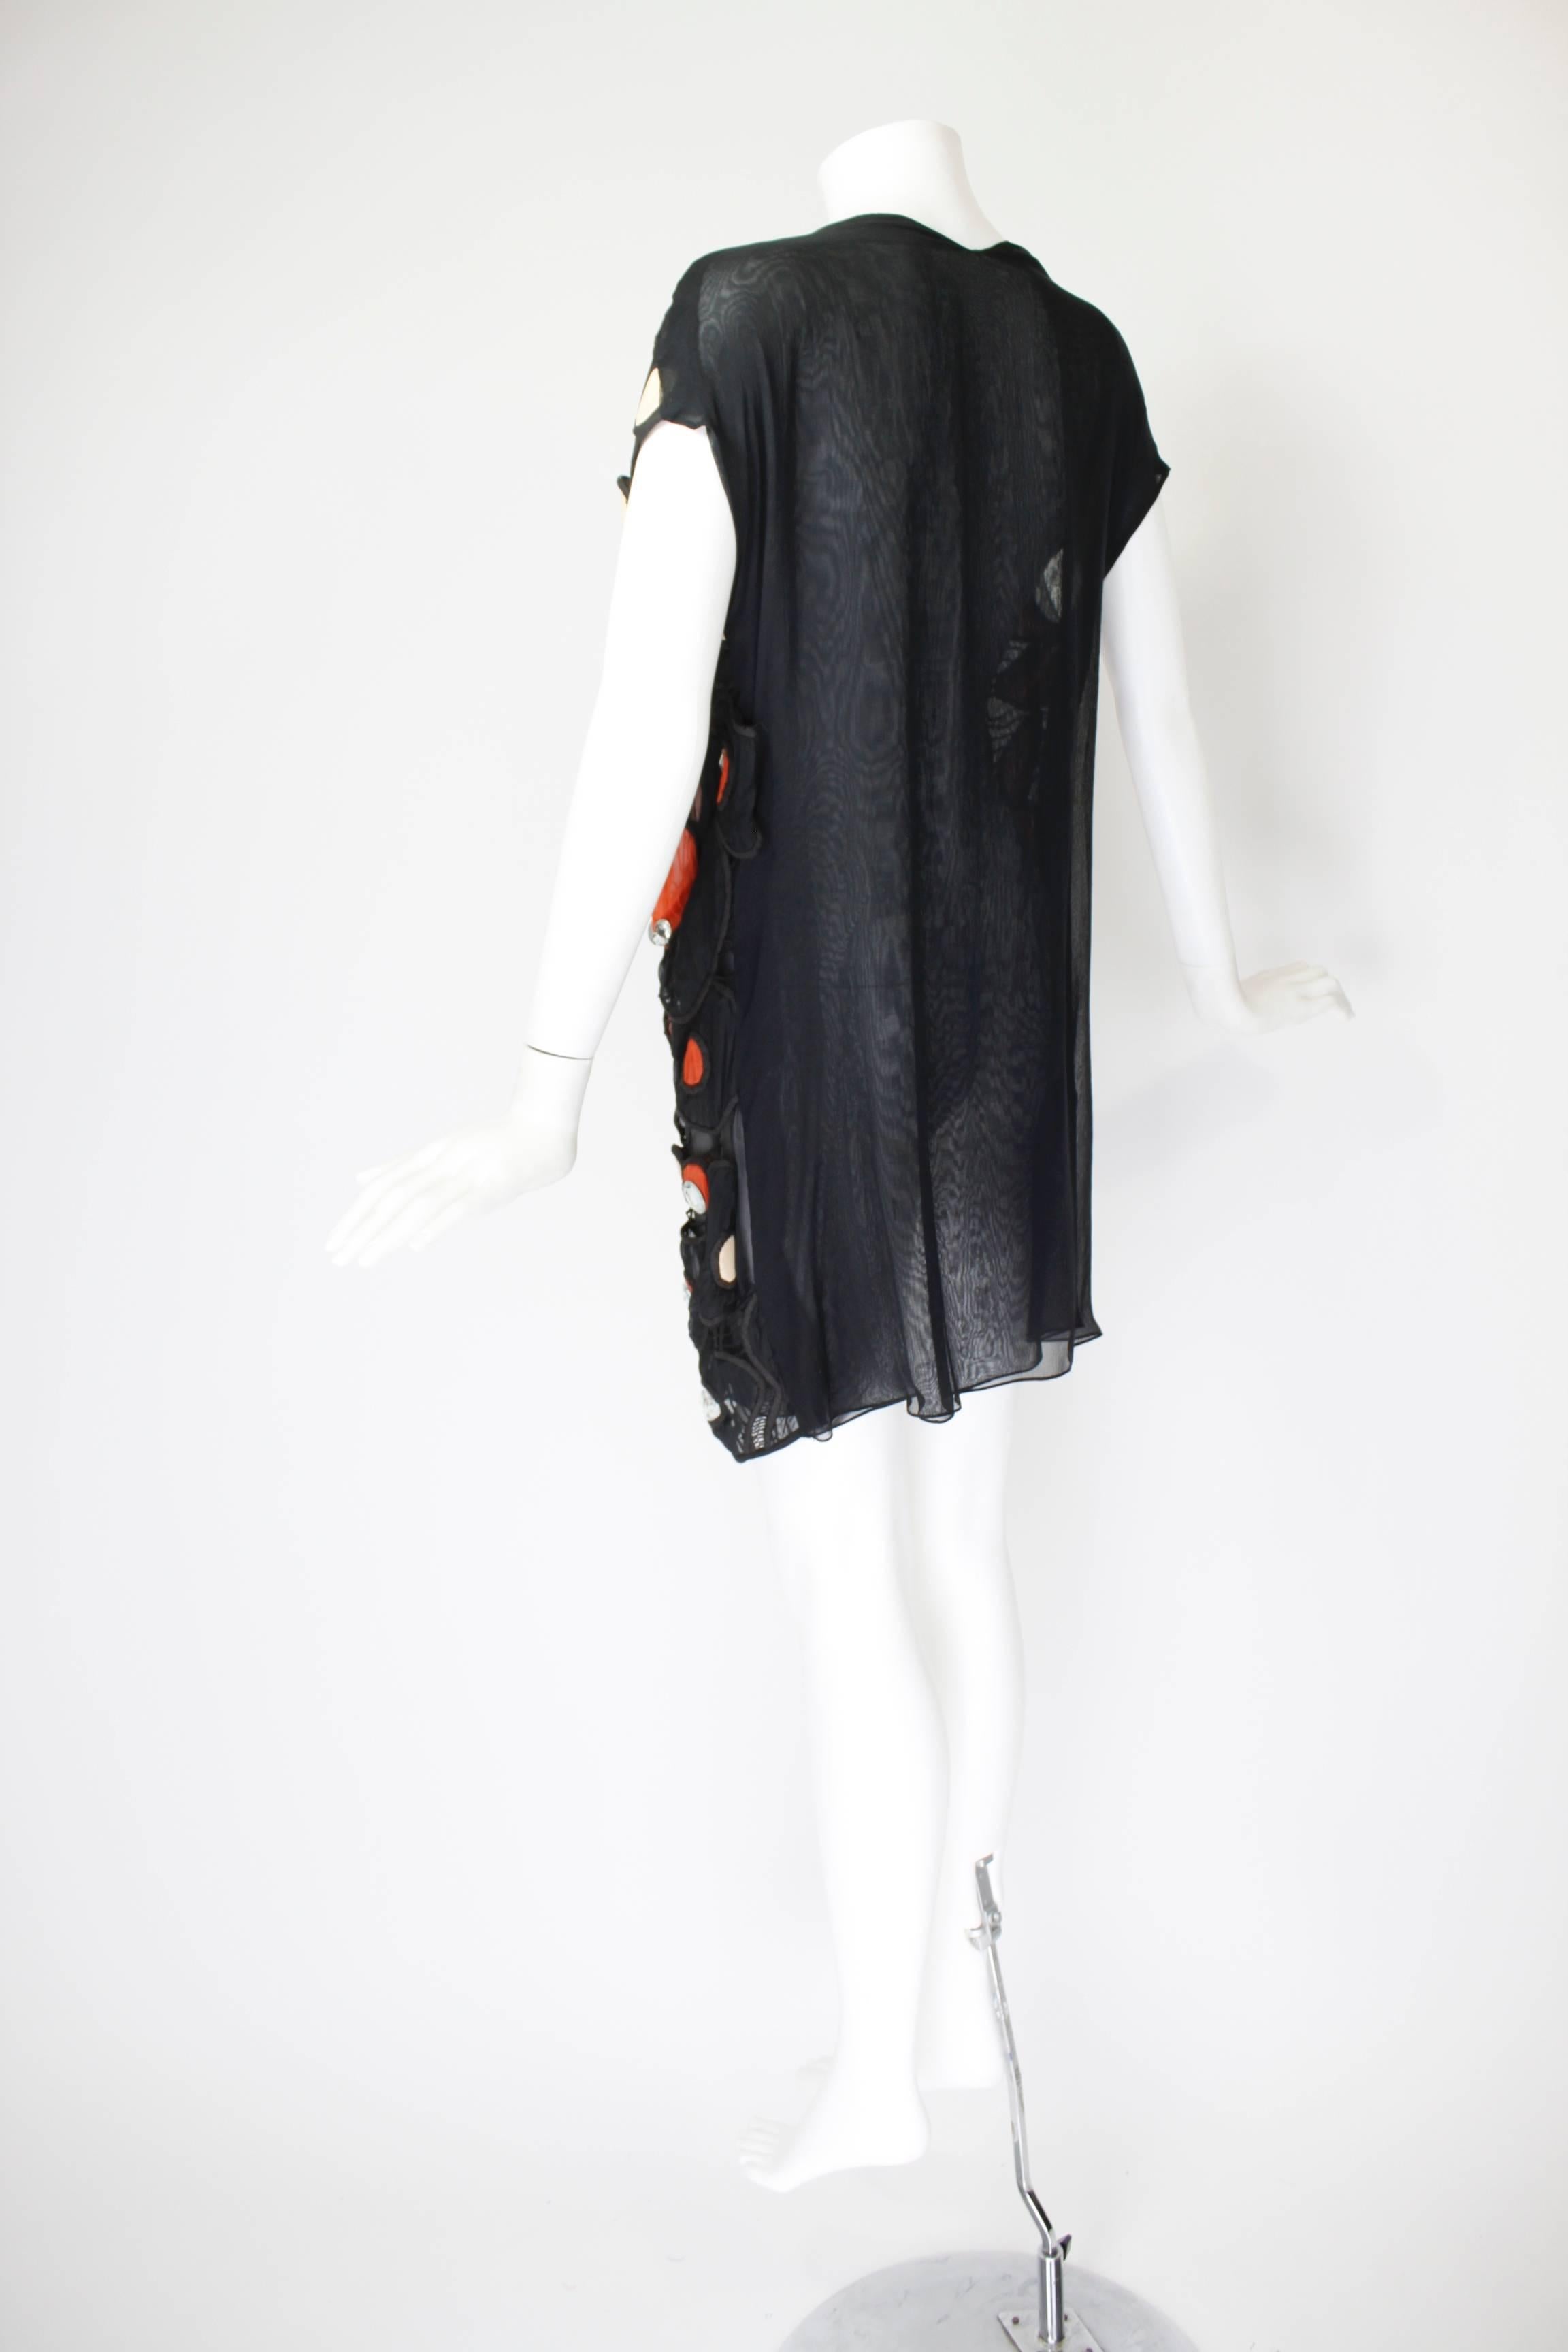 Hand Crocheted Vinyl Applique Tunic with Faceted Rhinestone Detail 2